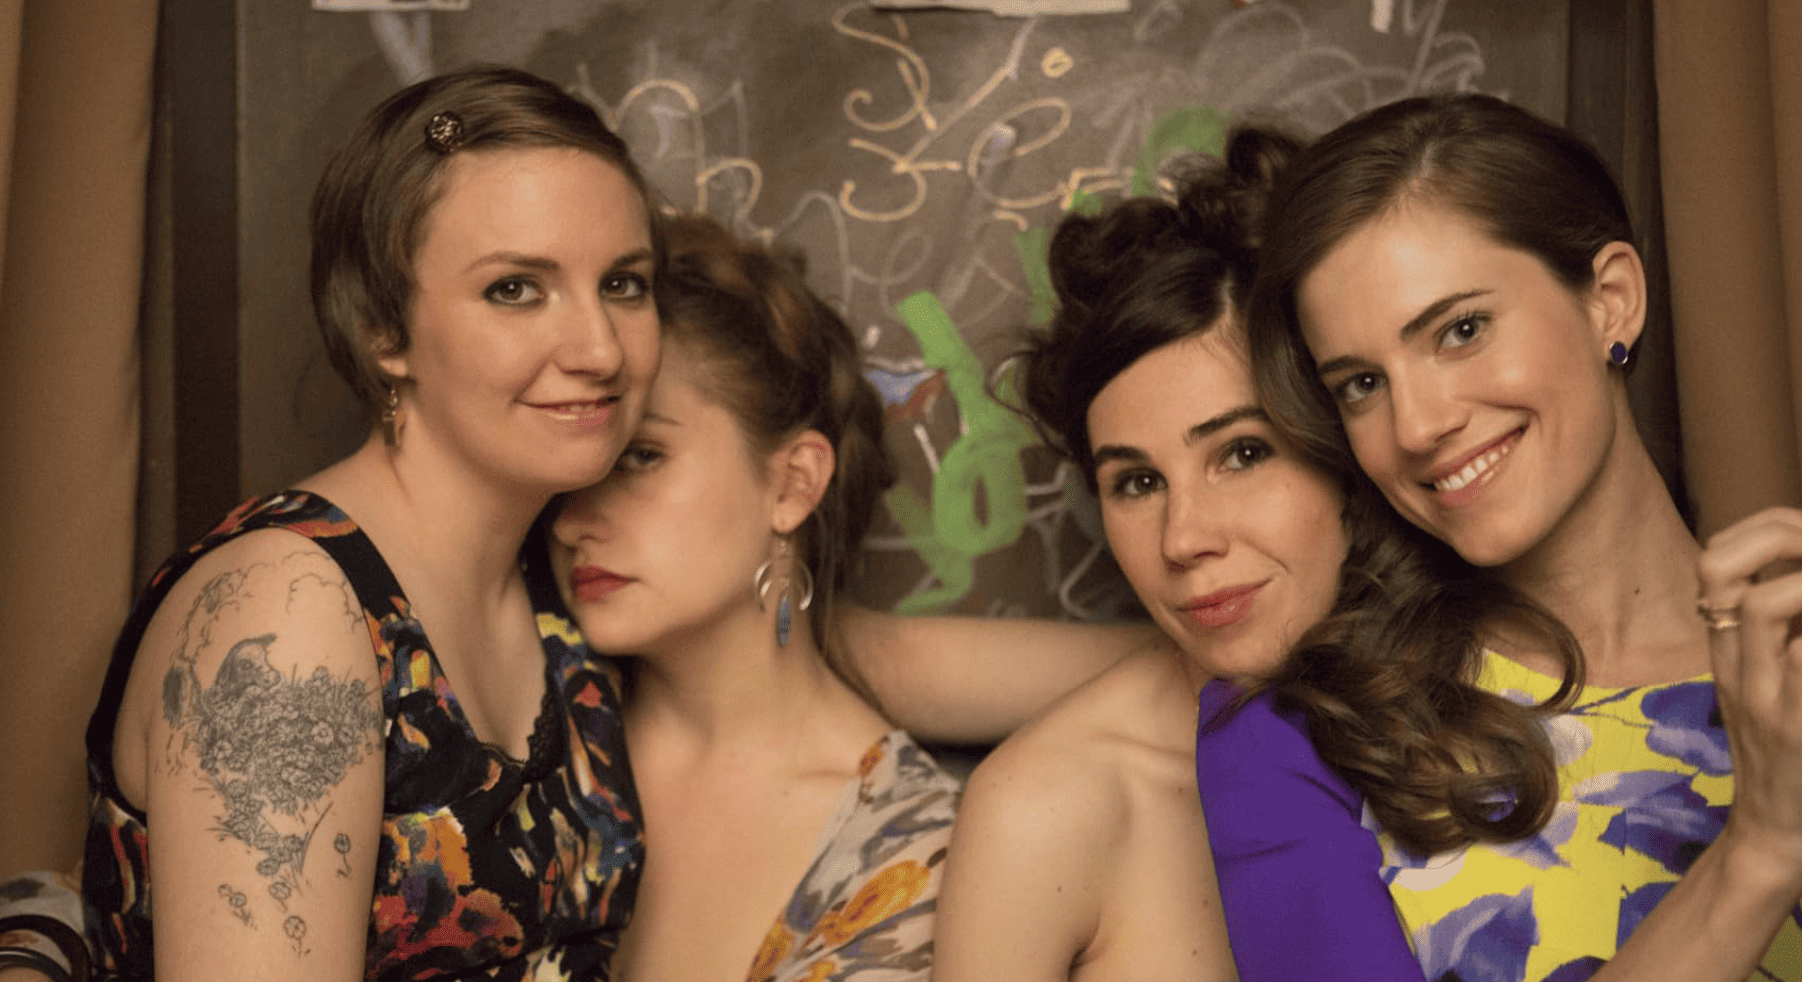 Lena Dunham, Jemima Kirke, Zosia Mamet, and Allison Williams pose for a promotional shoot of Girls in this image from Apatow Productions